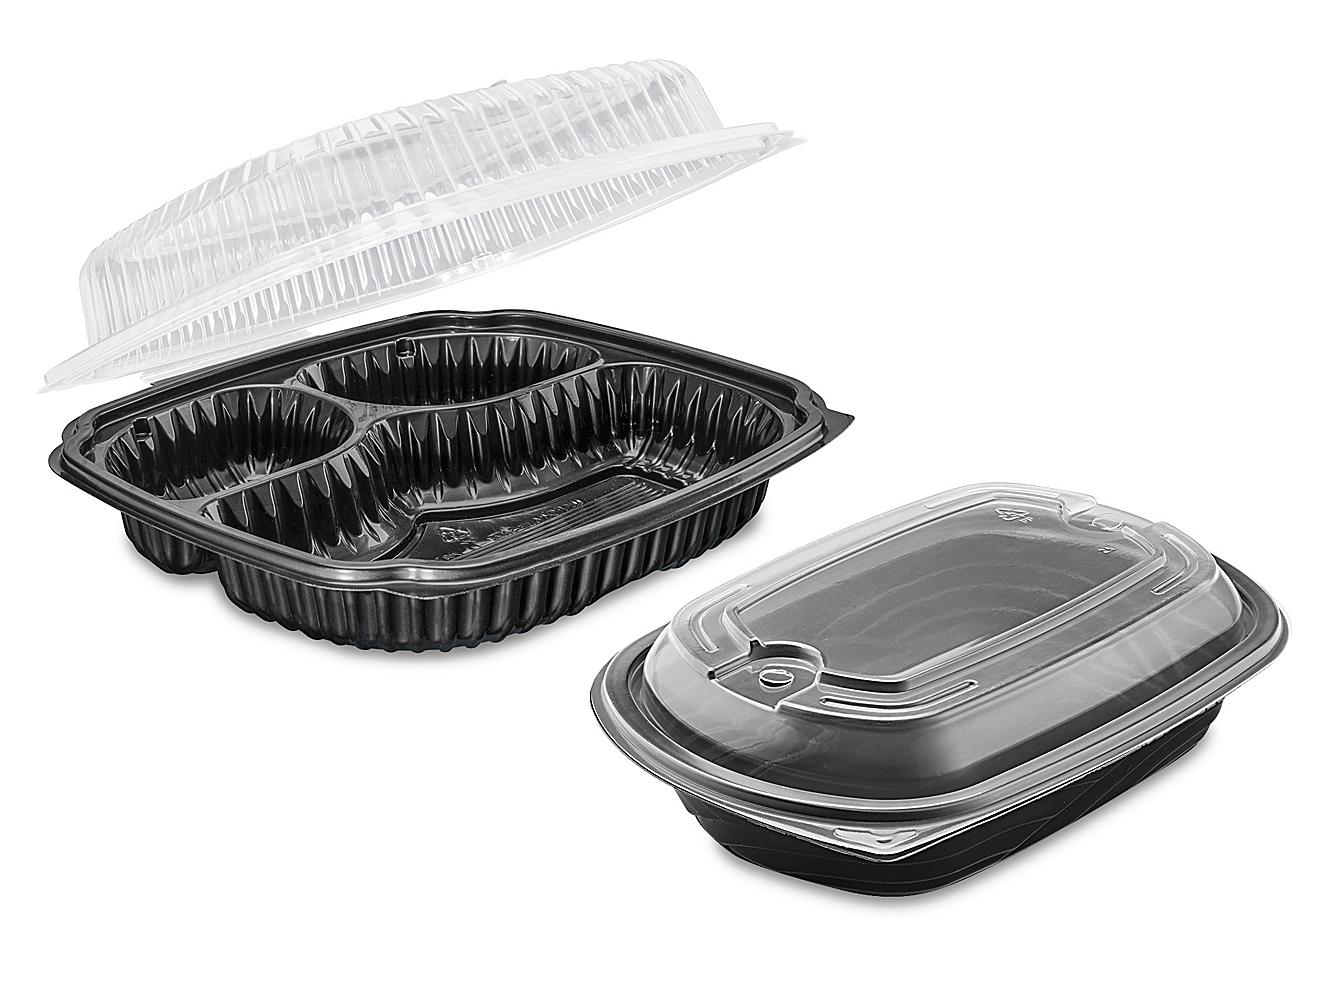 Take Out Containers, Take Out Food Containers in Stock - ULINE